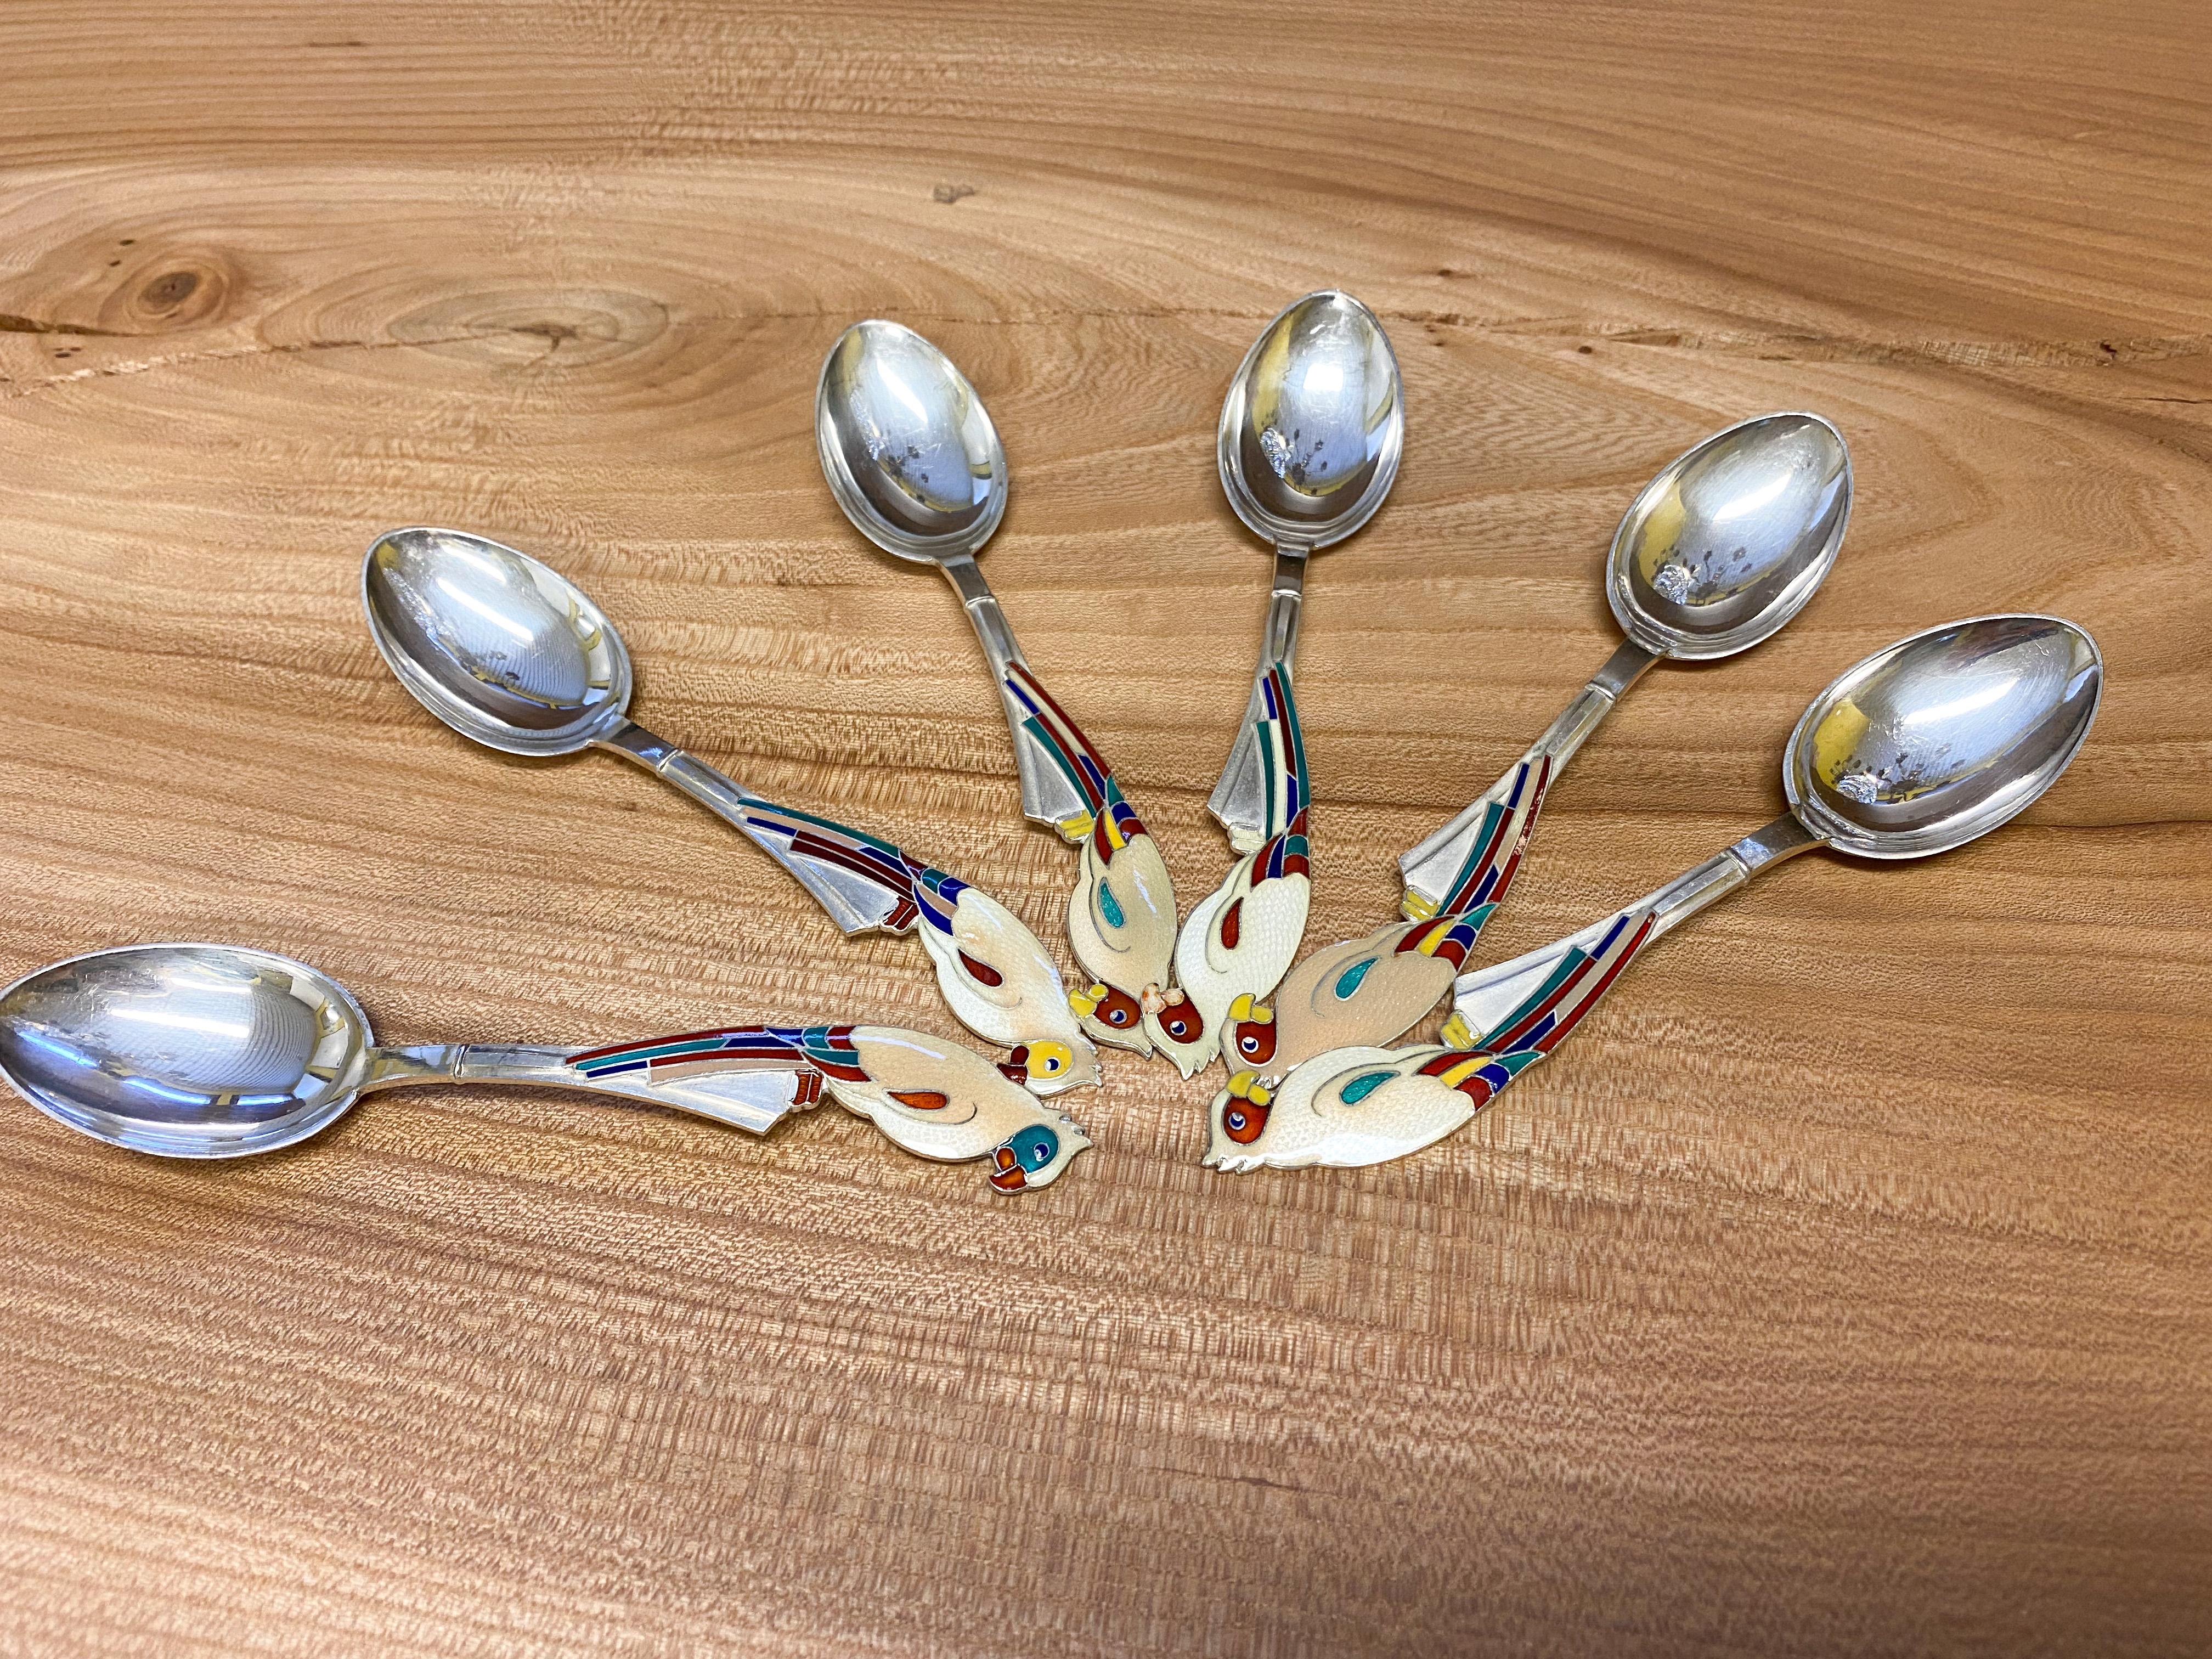 Set of 6 Russian Enamel Spoons
Fine and Rare Soviet Silver Spoons.
Enamelled. Enamel parrot
These were probably made in the 1950s.
Stamp Star, 916H and T30
Very solid body and a total weight of about 190g